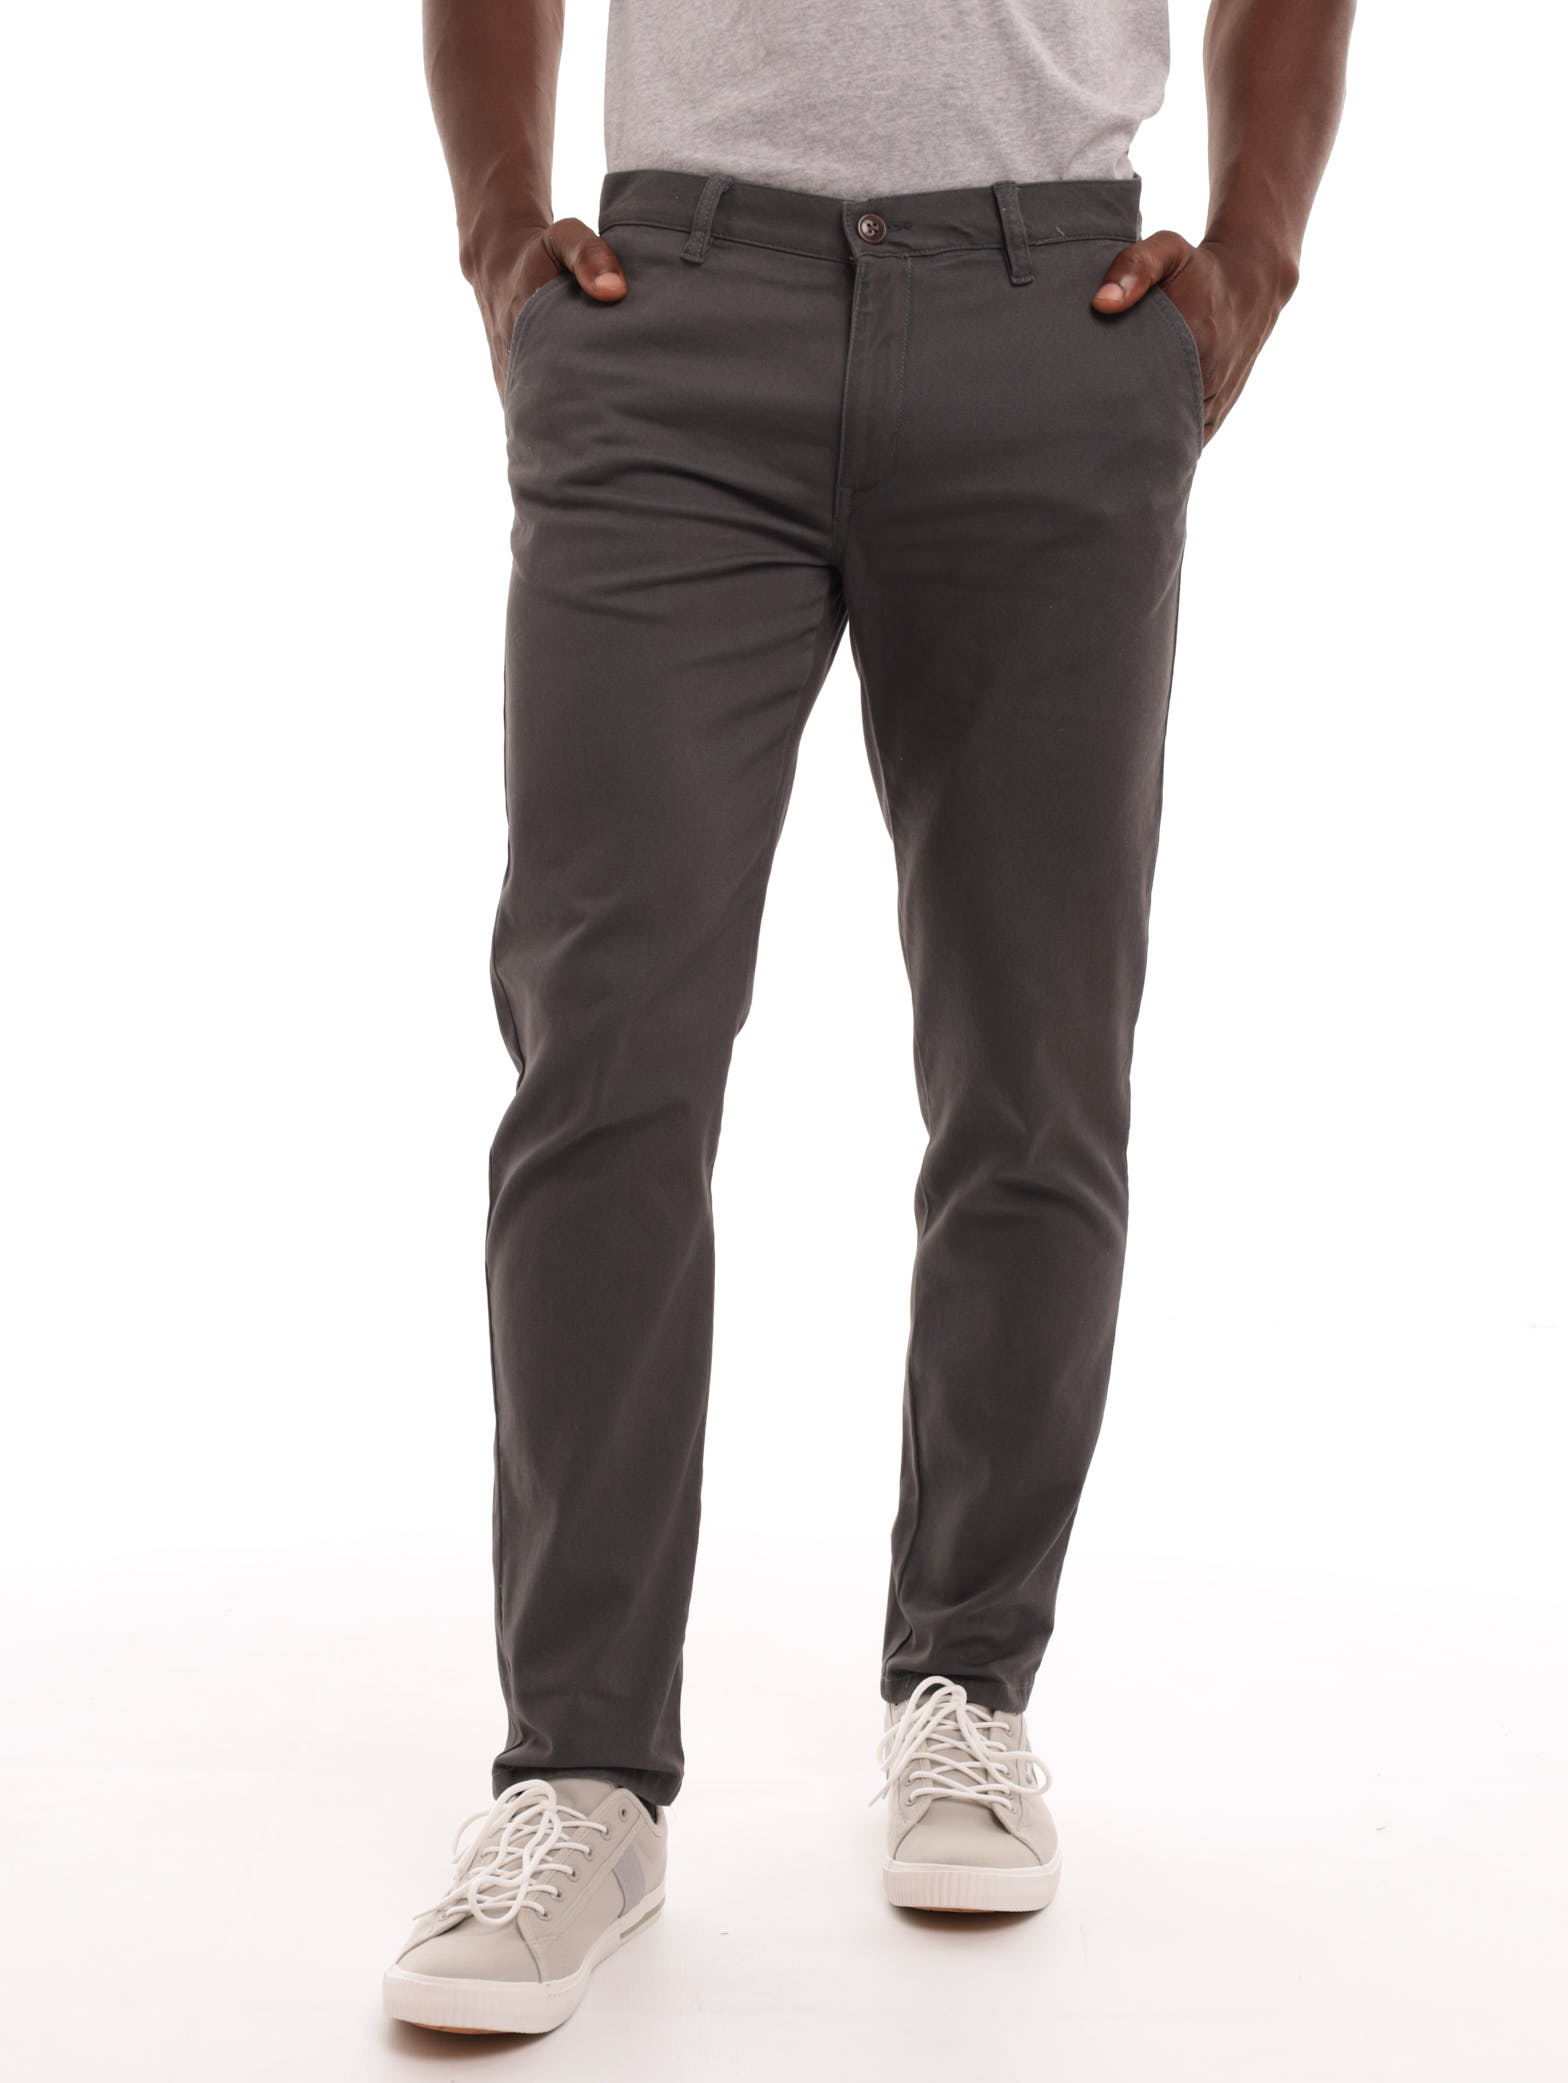 Men's Slim Fit Chino - Charcoal